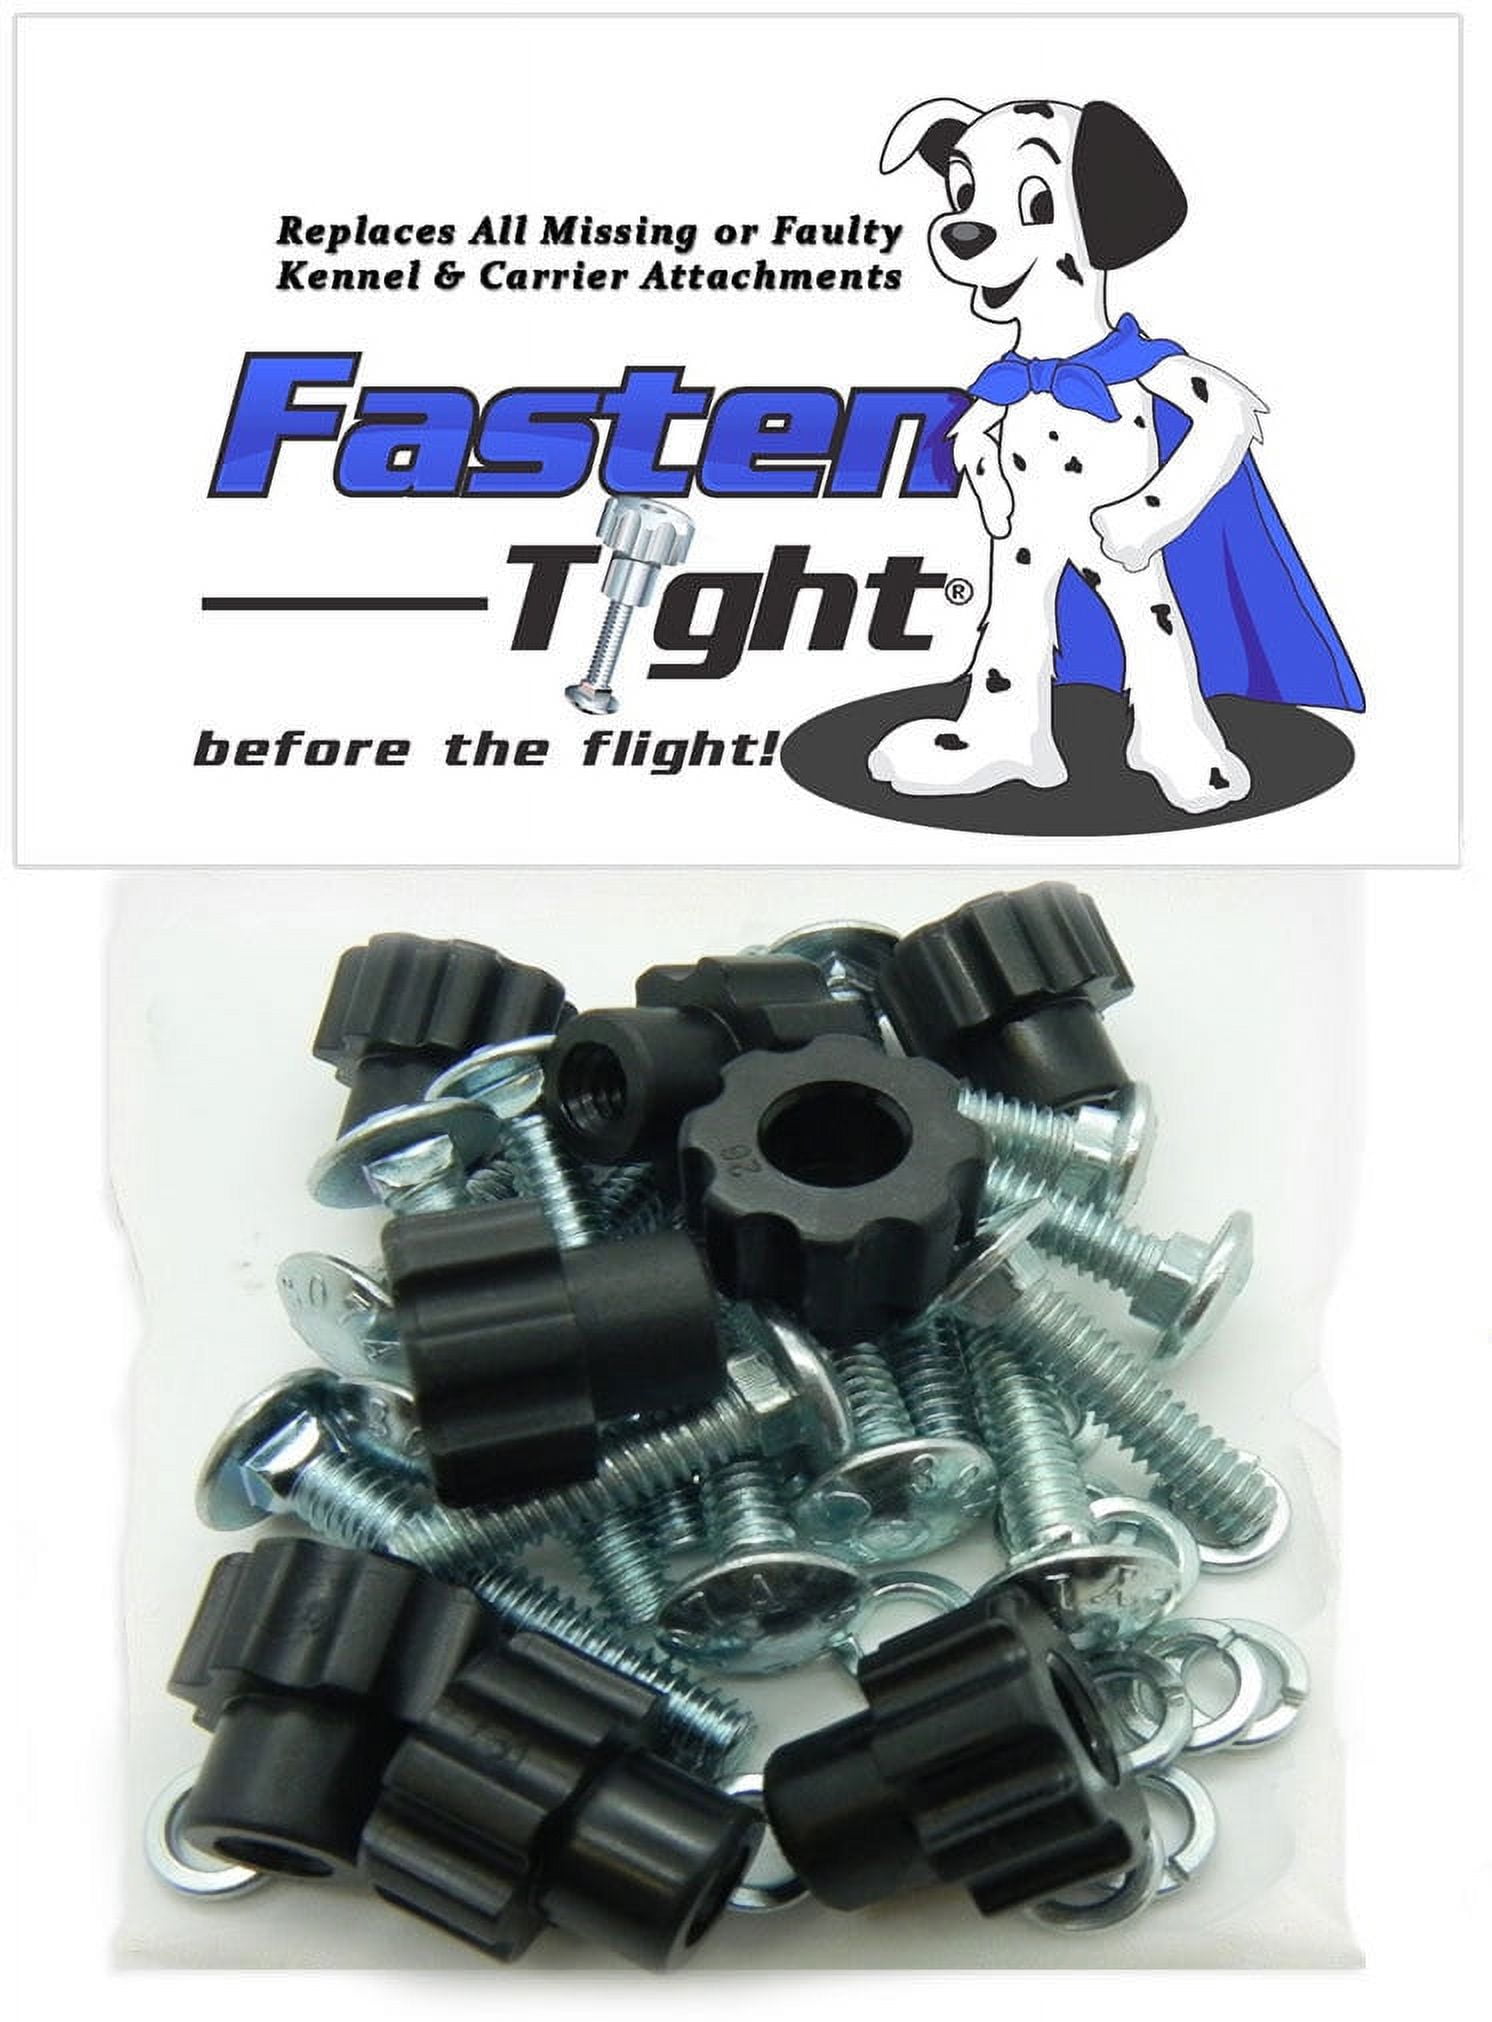 Metal Hardware fasteners for Cat Carriers, Pet Kennels, Dog Crates